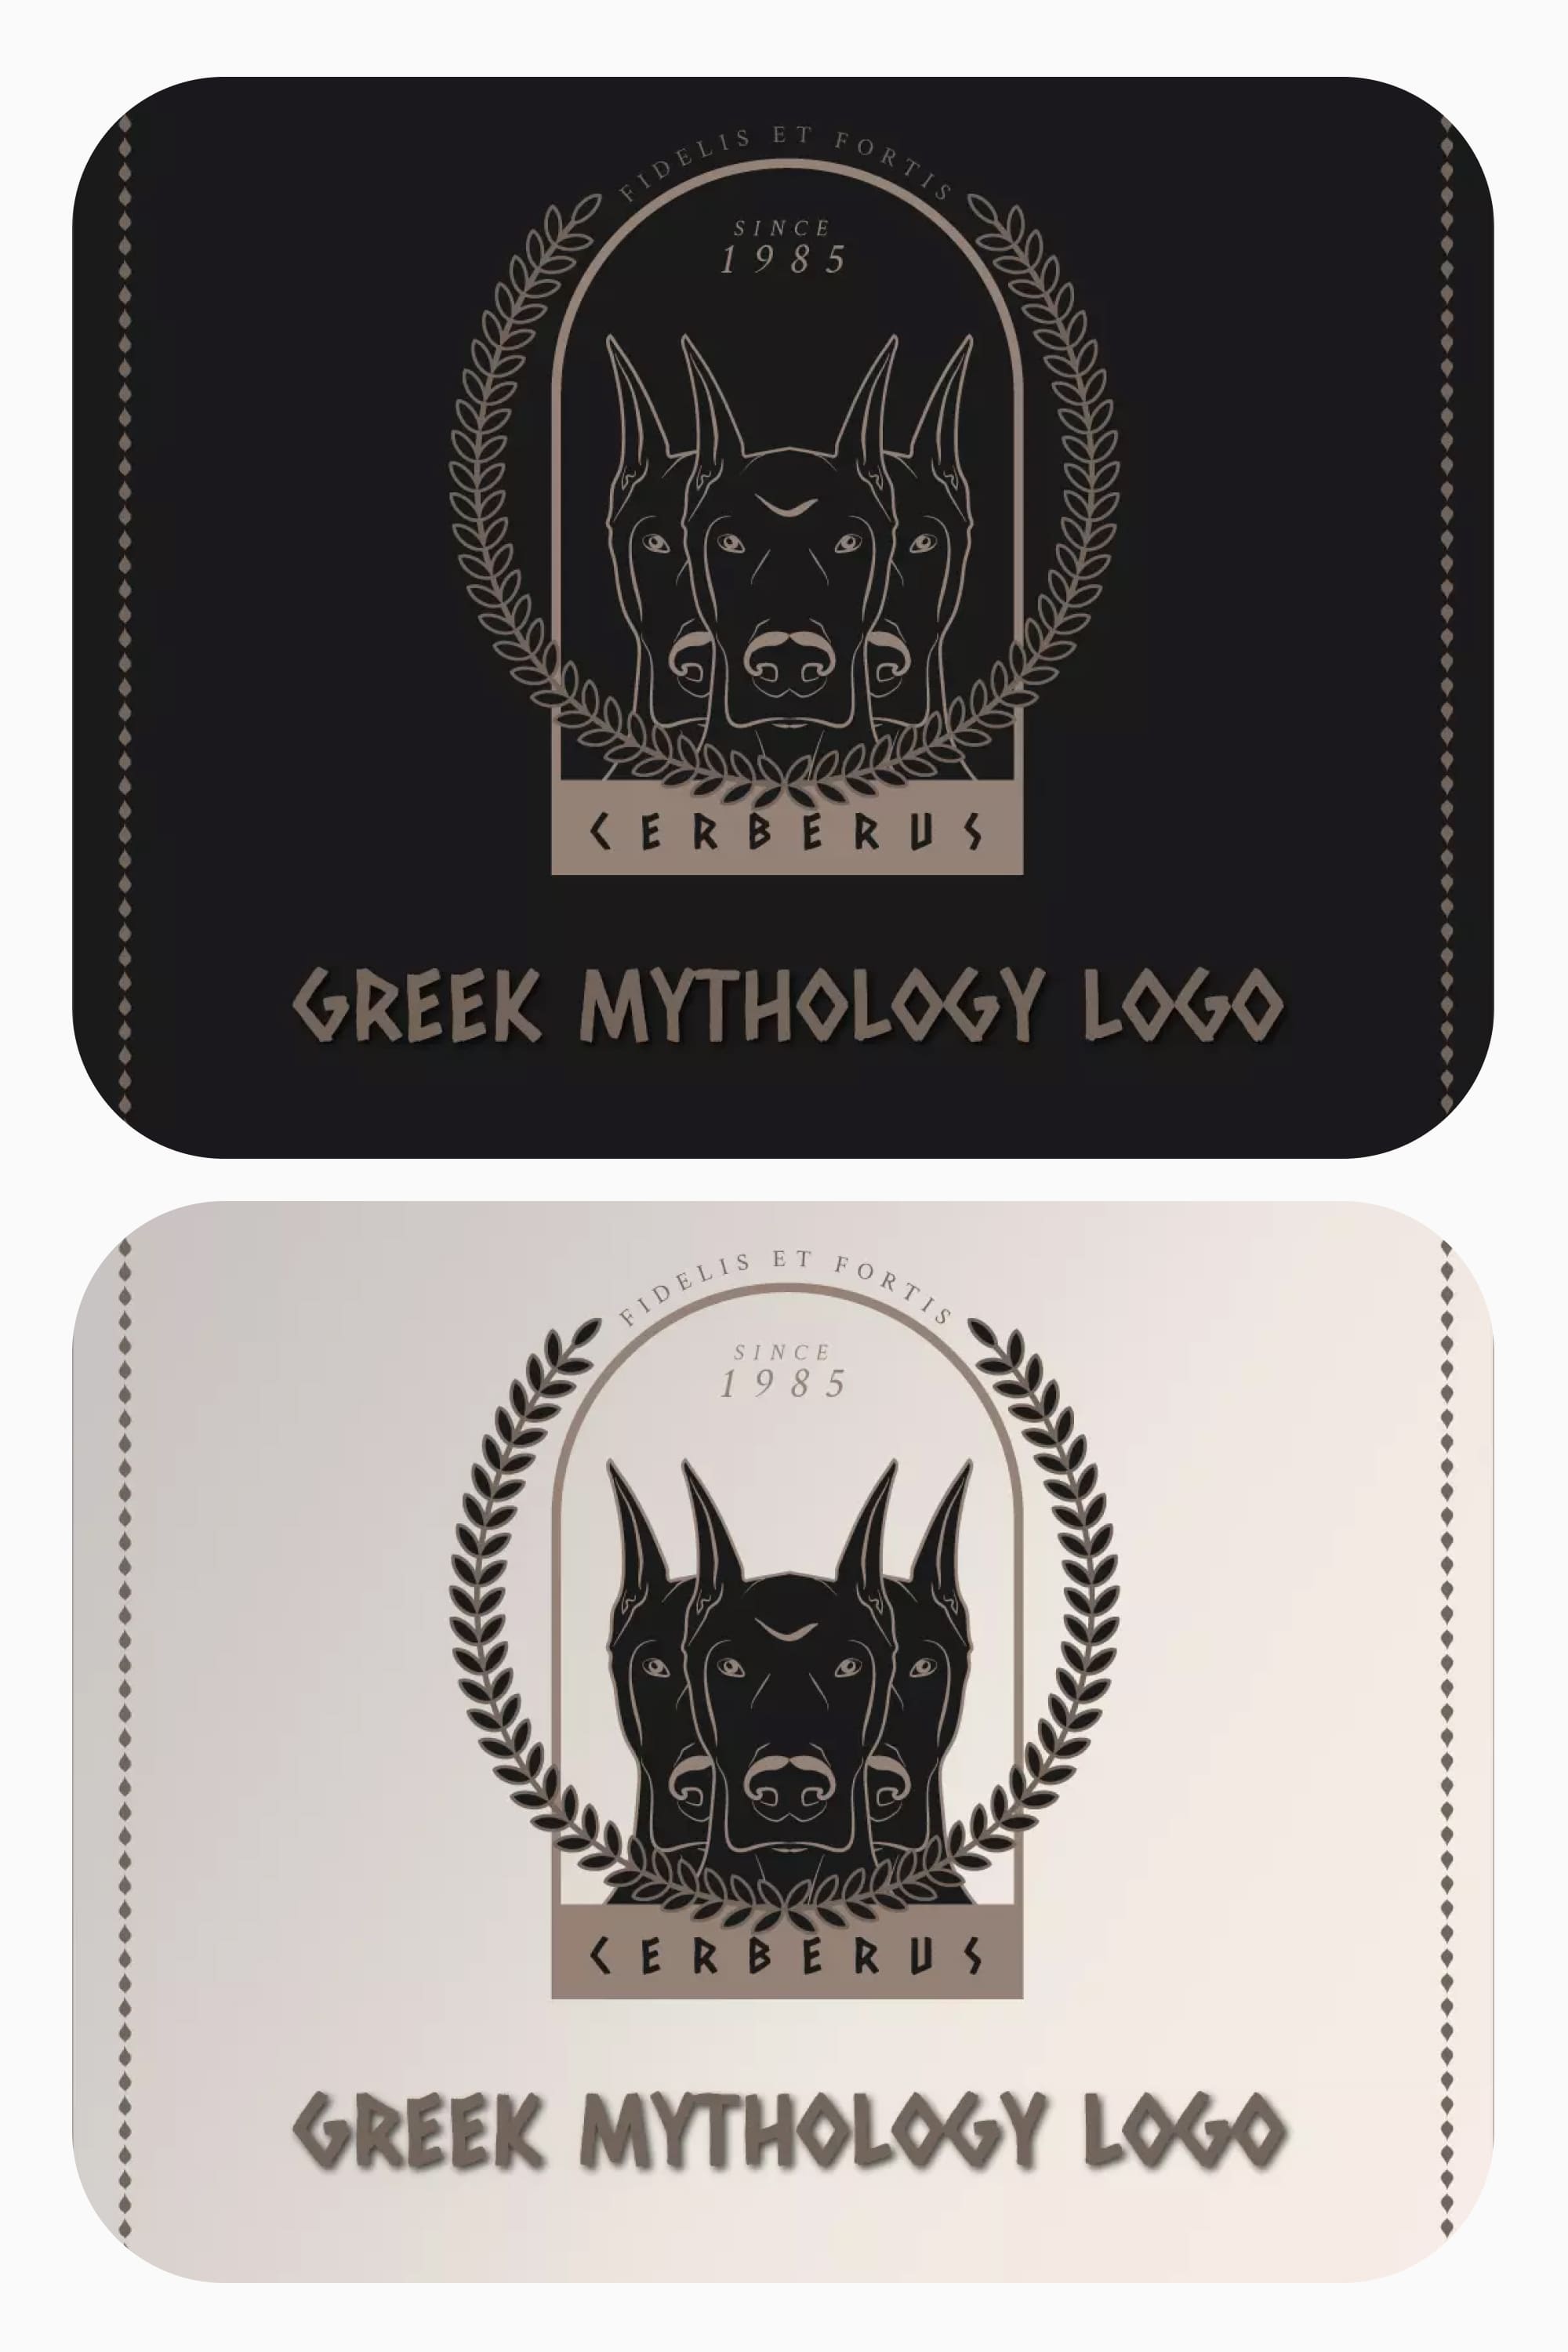 Collage of logos in the form of heads of Cerberus in the Greek style.